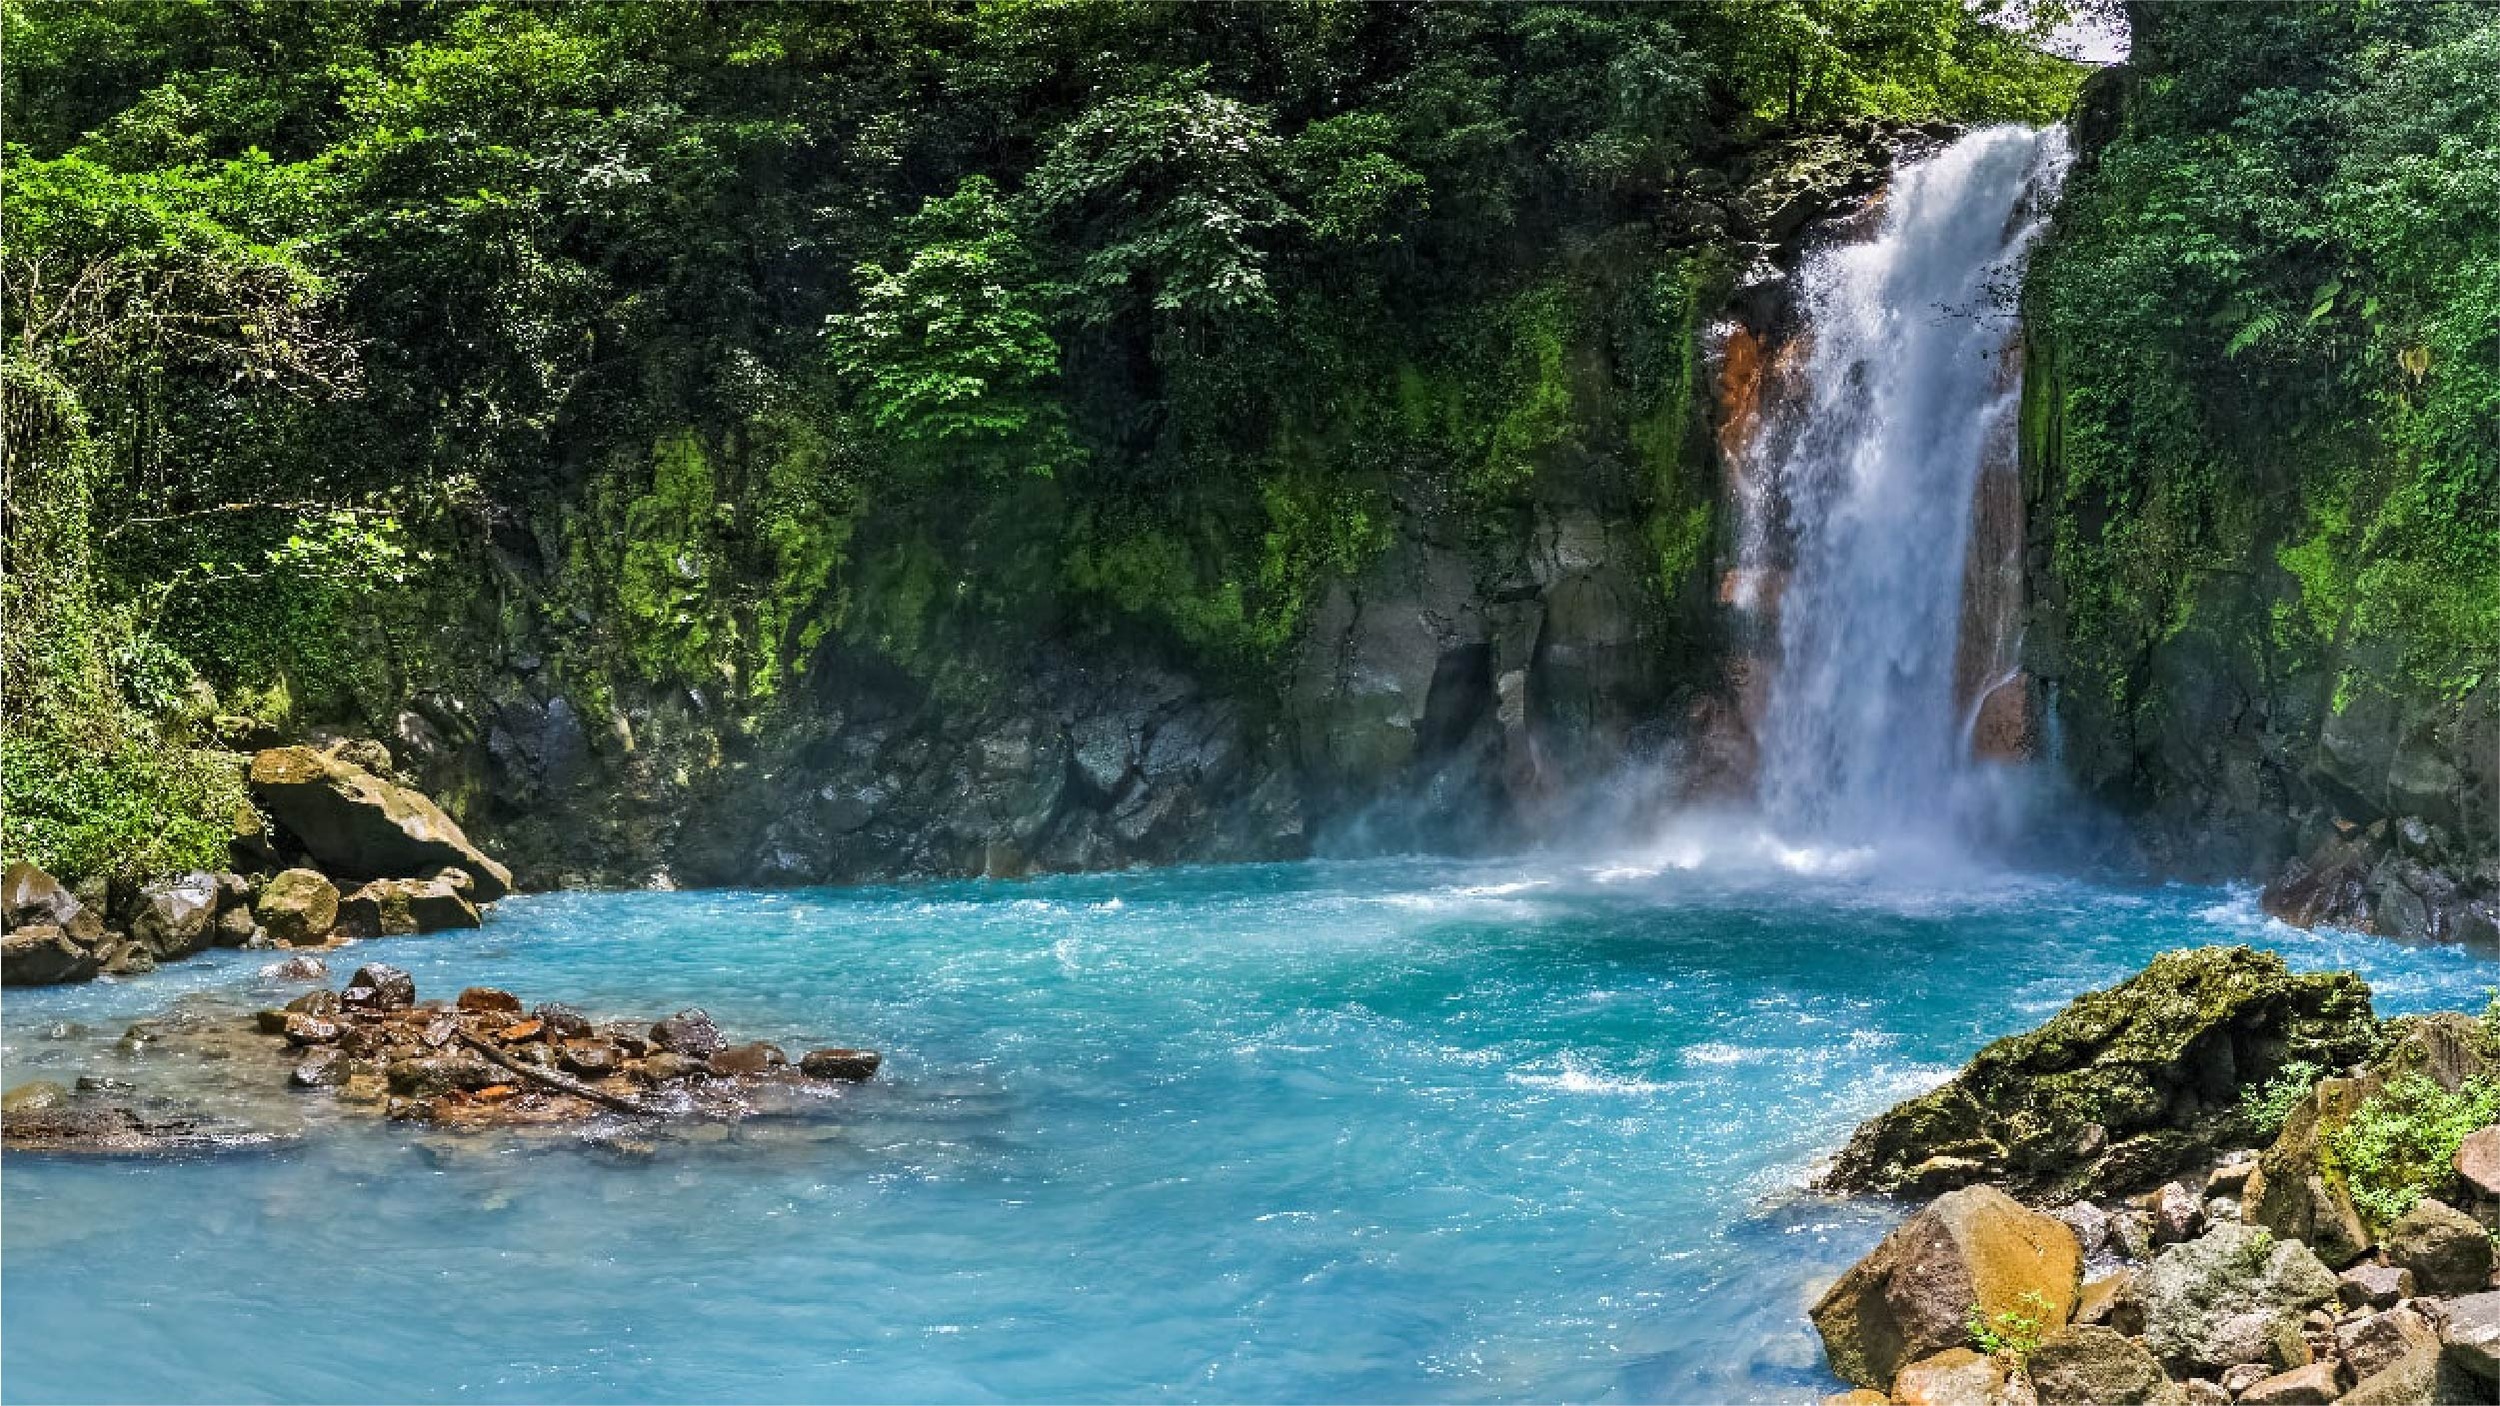 <p>The turquoise river has become a picture-perfect symbol of Costa Rica, and you absolutely must take a river tube to see it. The water looks photoshopped, and the lush foliage rains down on those who ride its rapids. The waterfall draws tourists in (for good reason), but the river itself is one of the coolest things we've seen in Costa Rica. </p><p>You may also like: <a href='https://www.yardbarker.com/lifestyle/articles/11_most_scenic_pacific_northwest_road_trips_091023/s1__38393677'>11 most scenic Pacific Northwest road trips</a></p>